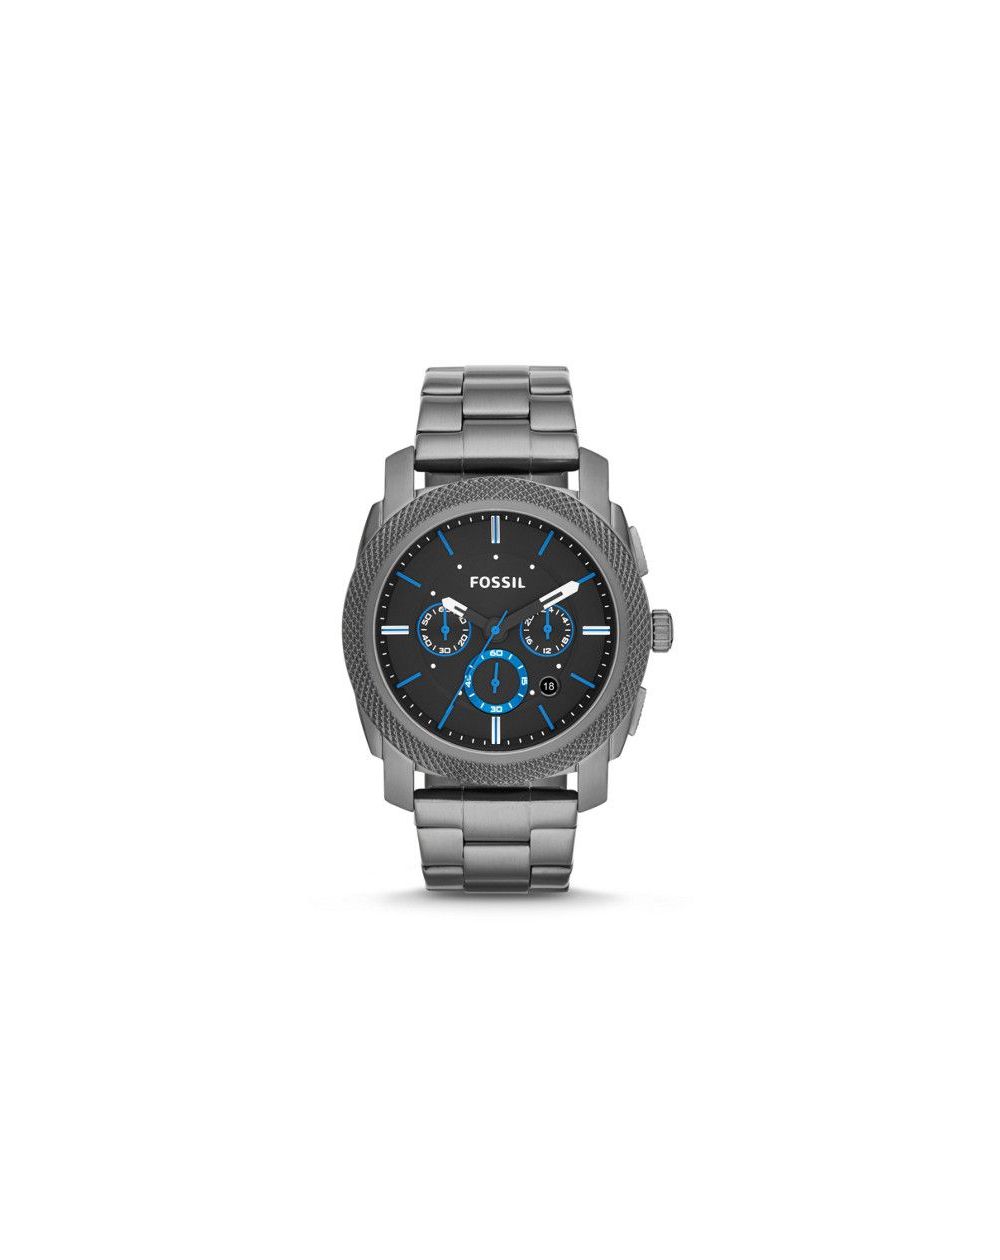 Fossil - Watch Machine Stainless Steel Chronograph - Charcoal